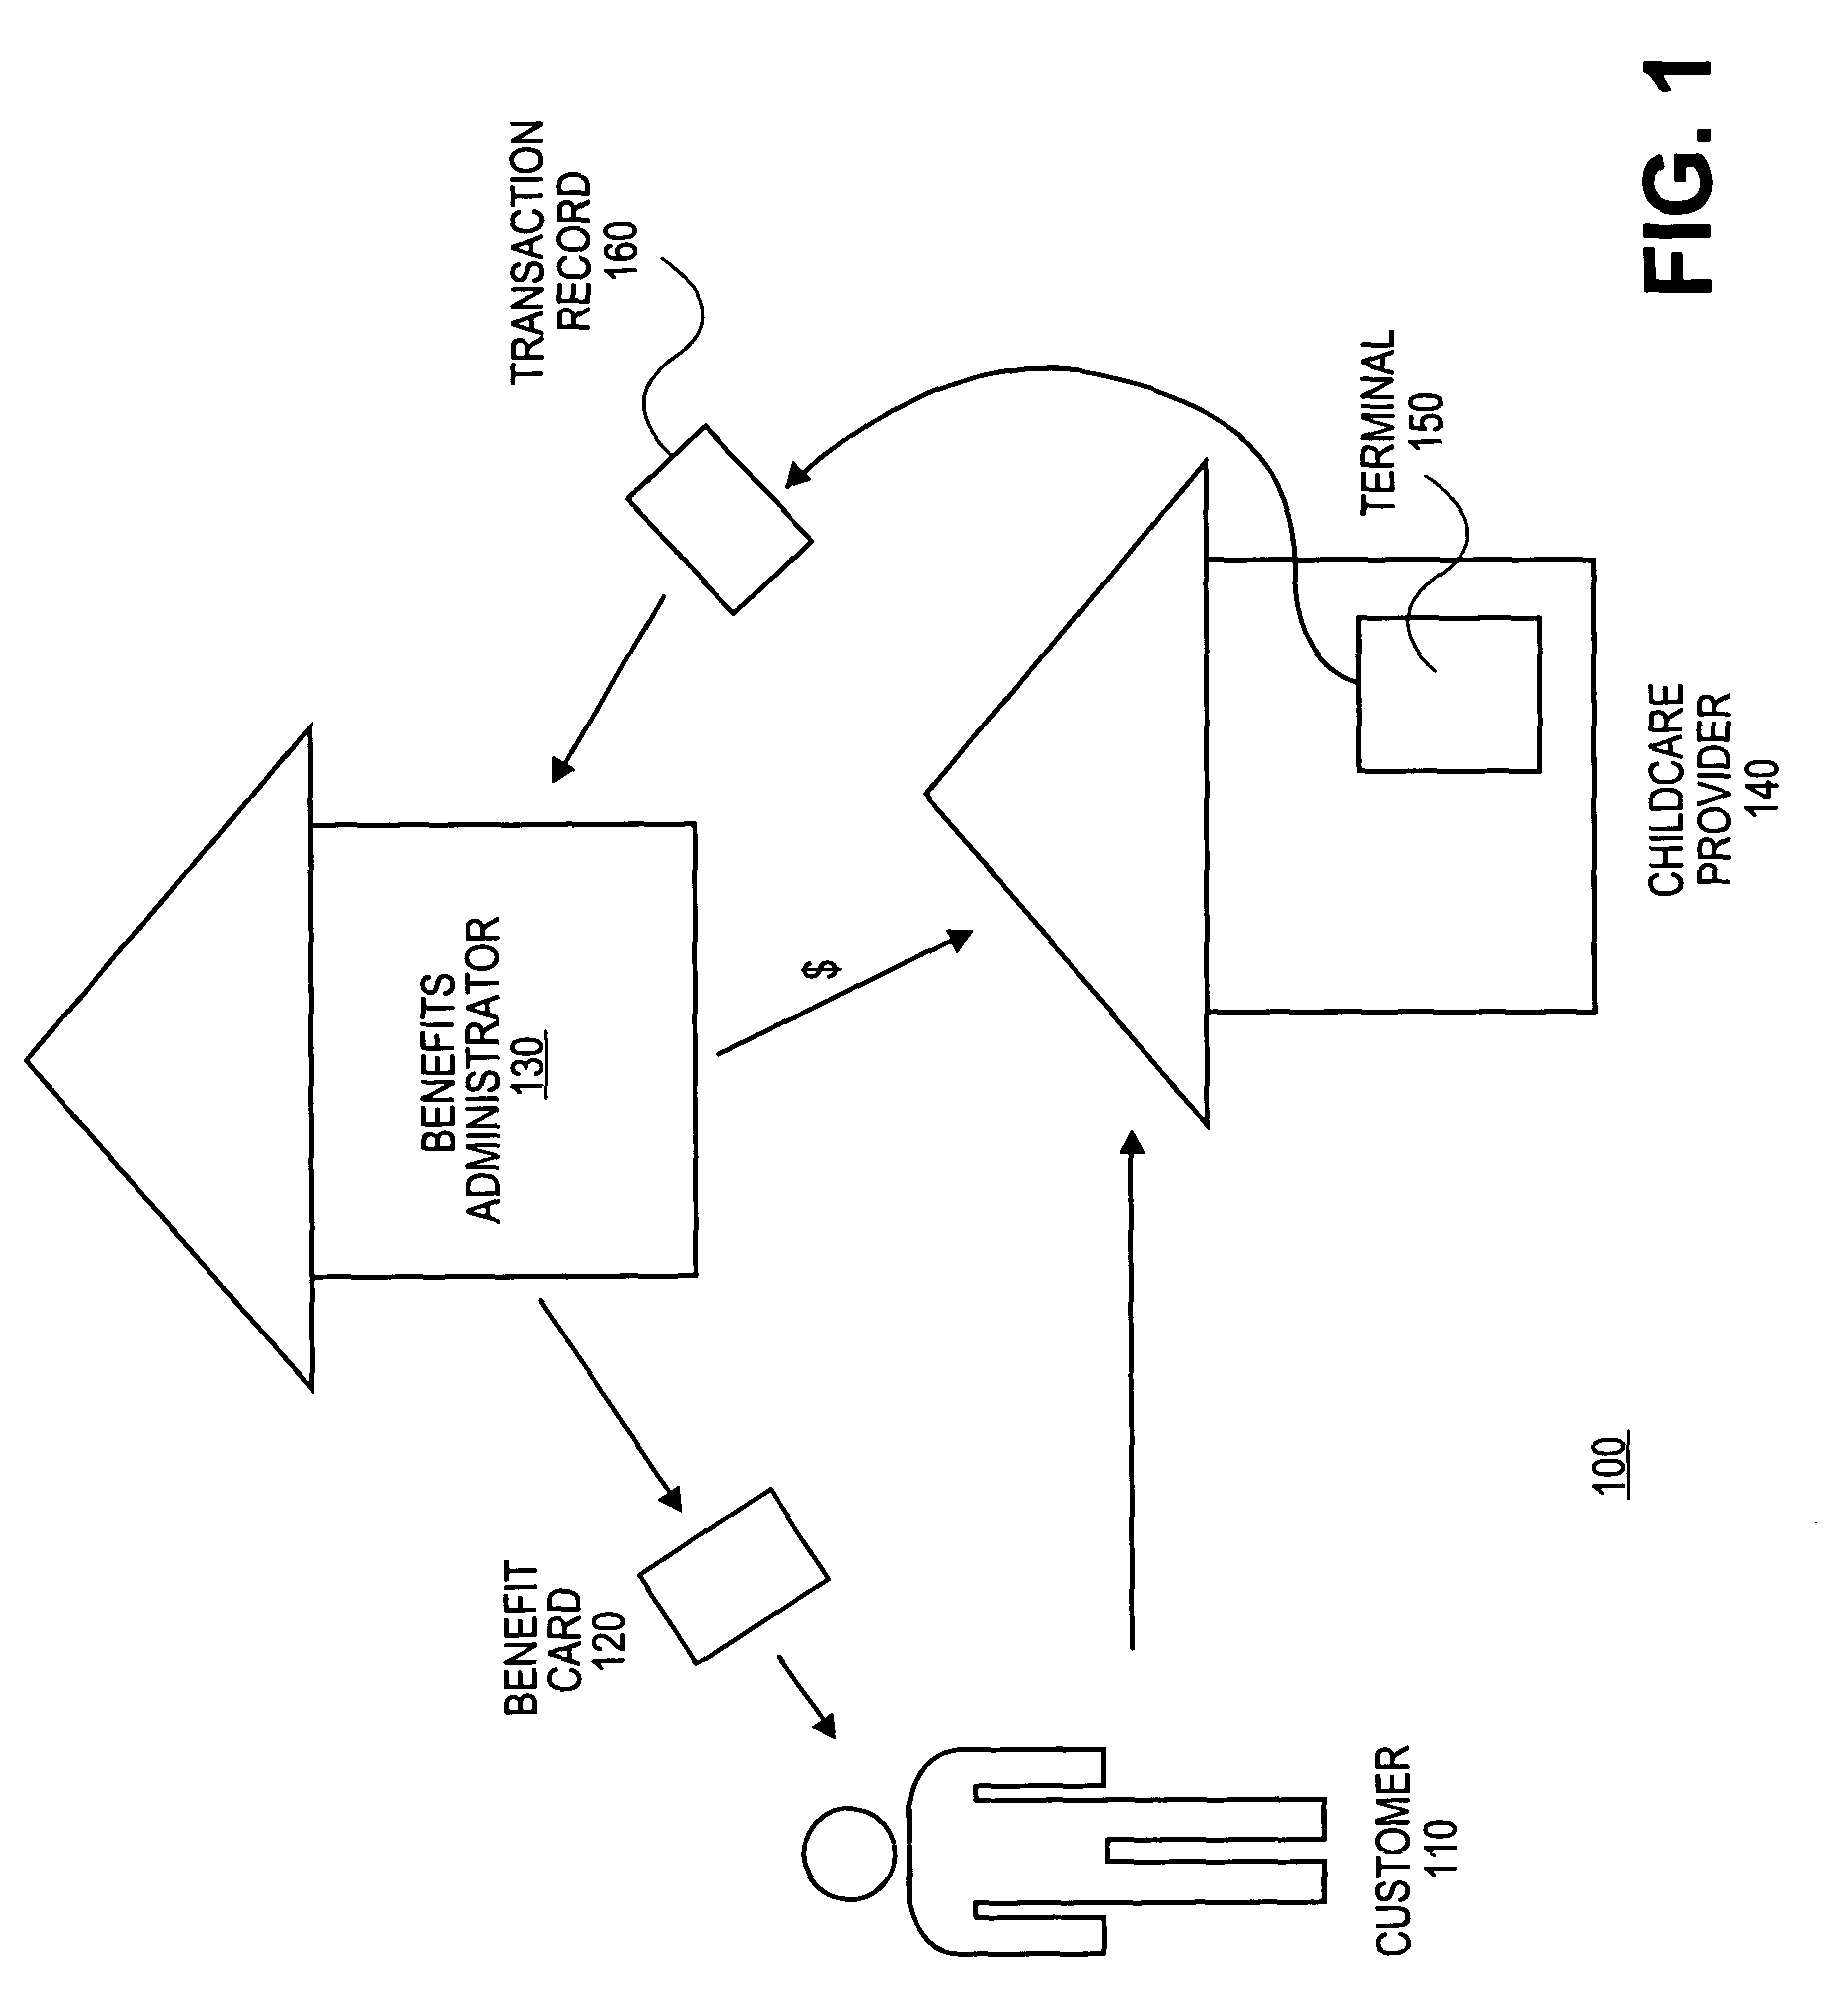 Systems and methods for processing benefits